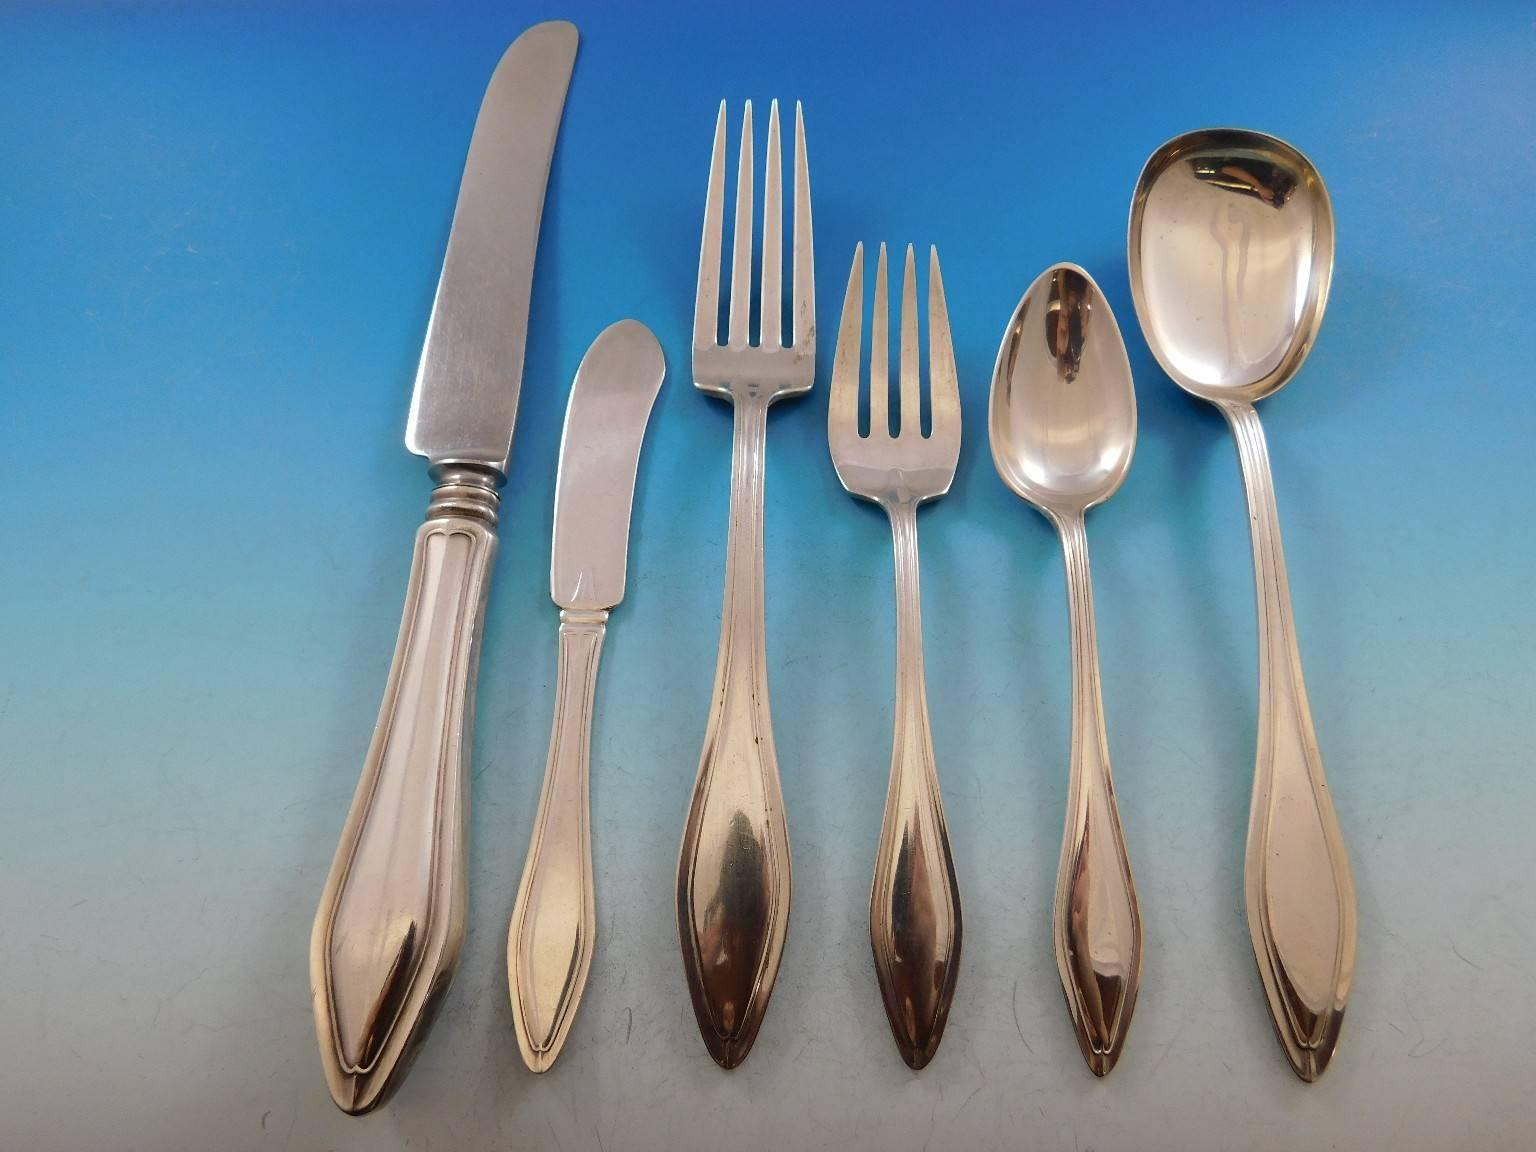 Dinner Size Mary Chilton by Towle sterling silver Flatware set - 52 pieces. This set includes:

    8 Dinner Size Knives, 9 3/4